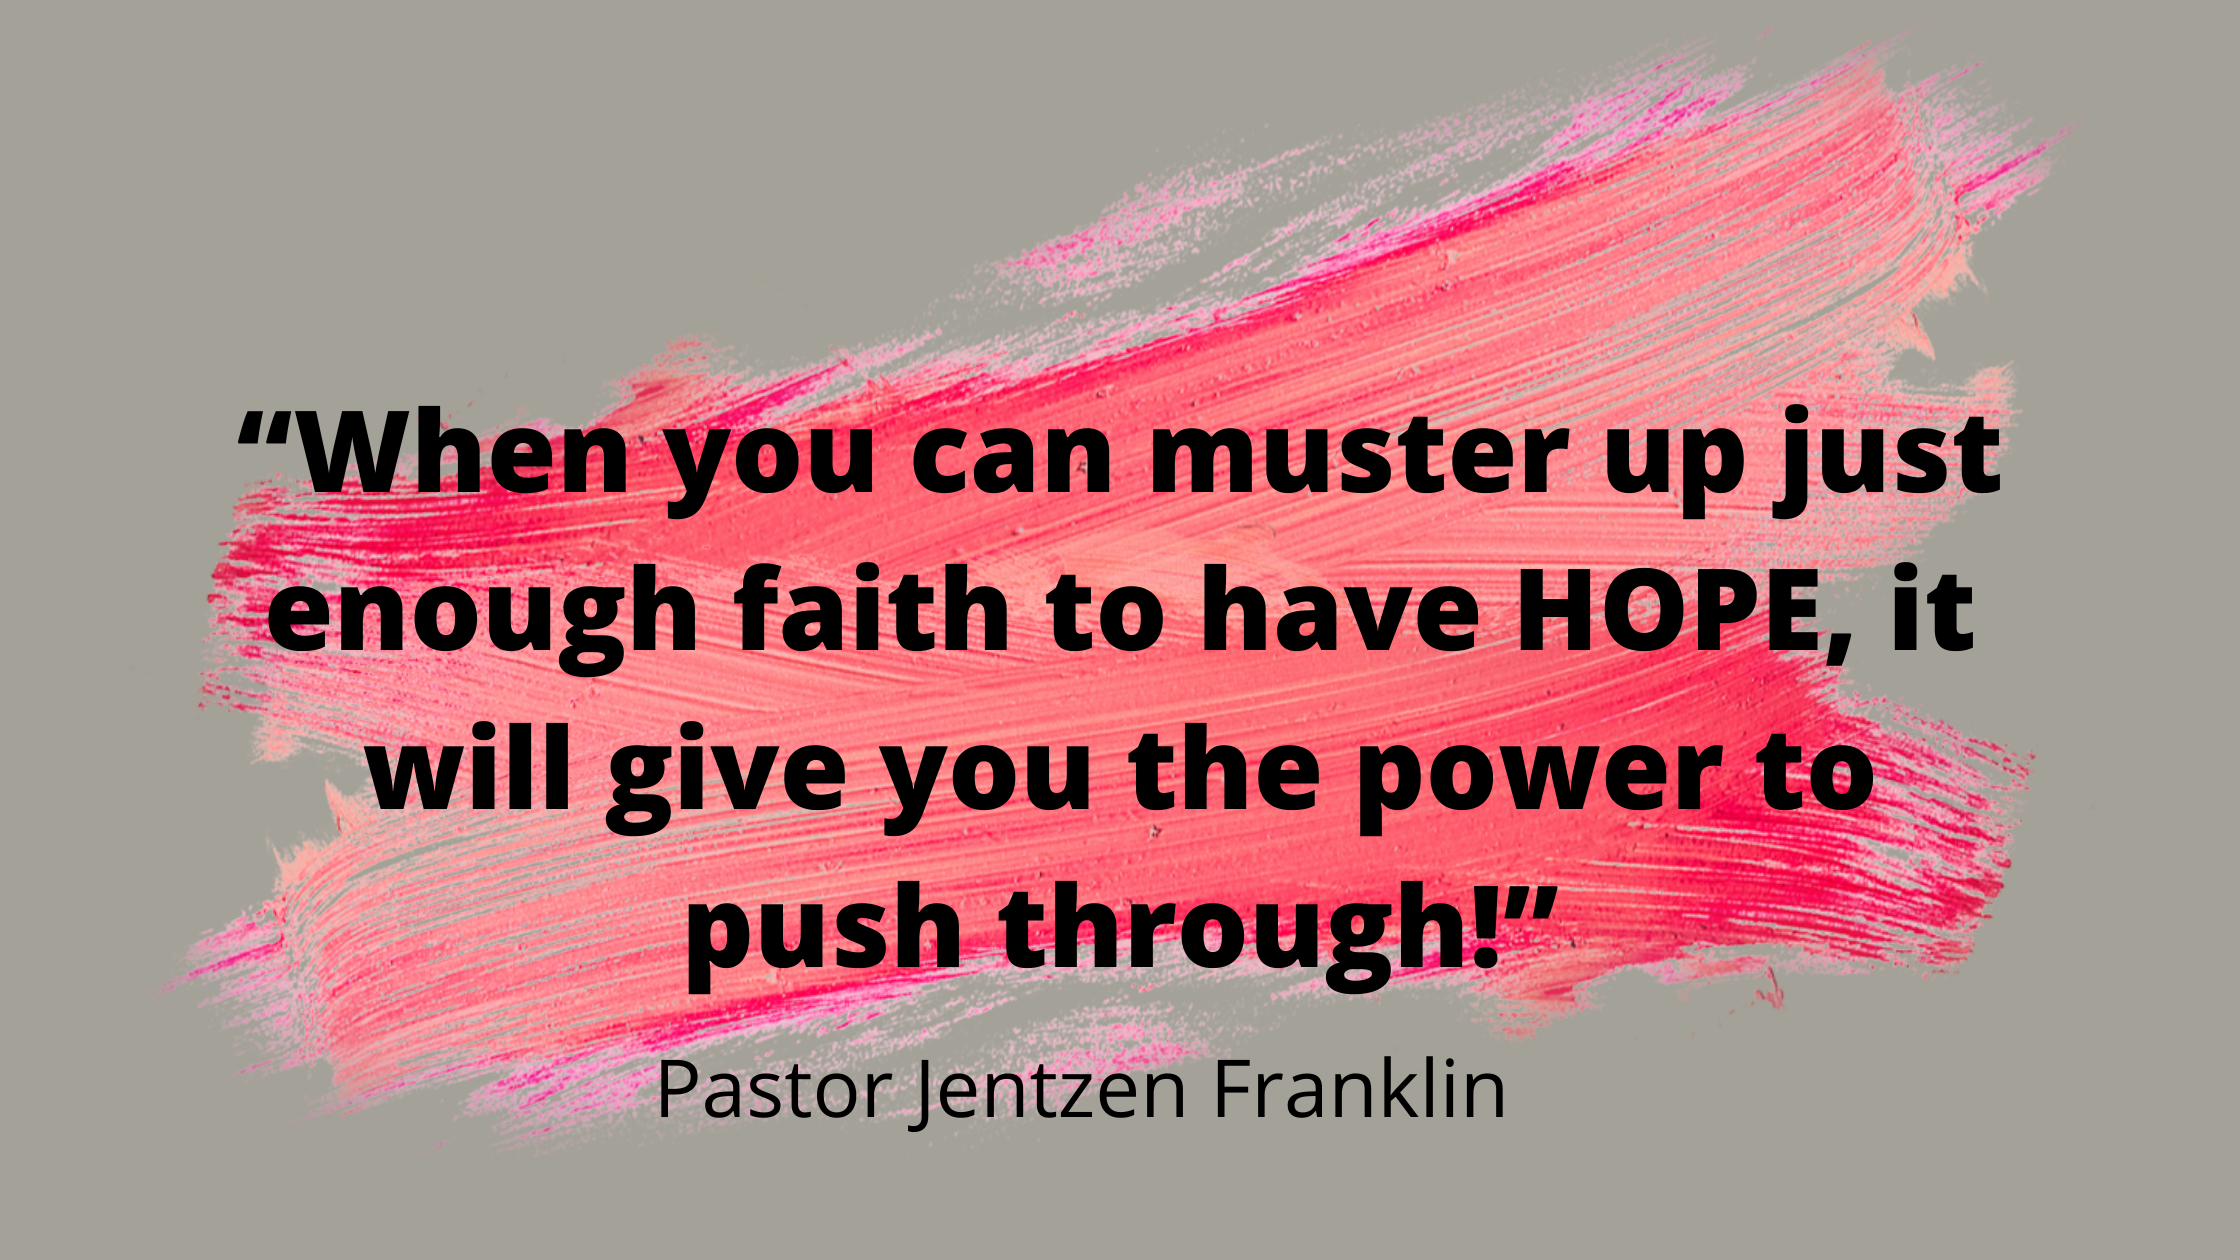 “When you can muster up just enough faith to have HOPE, it will give you the power to push through!”